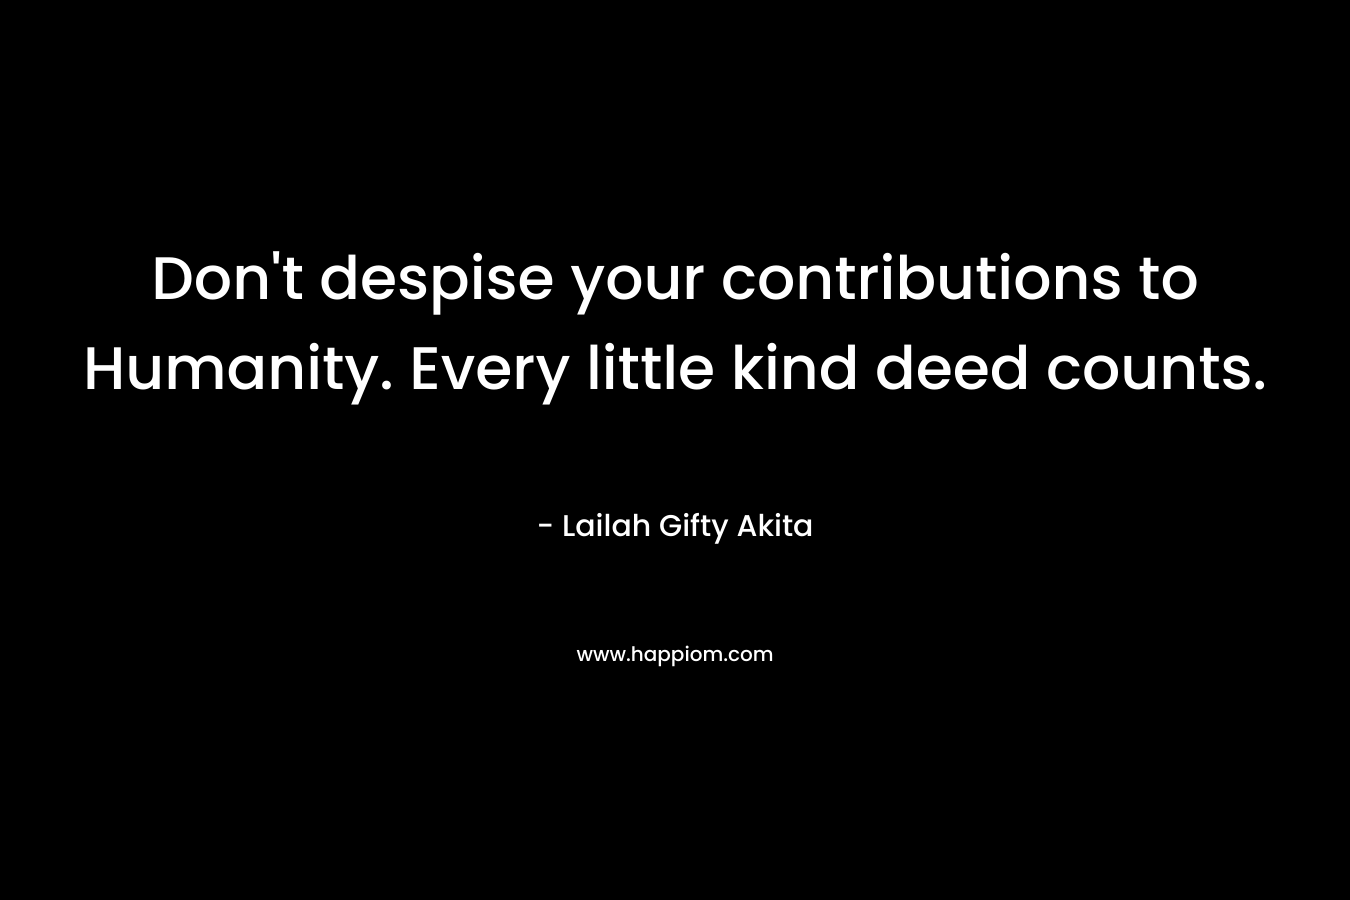 Don’t despise your contributions to Humanity. Every little kind deed counts. – Lailah Gifty Akita